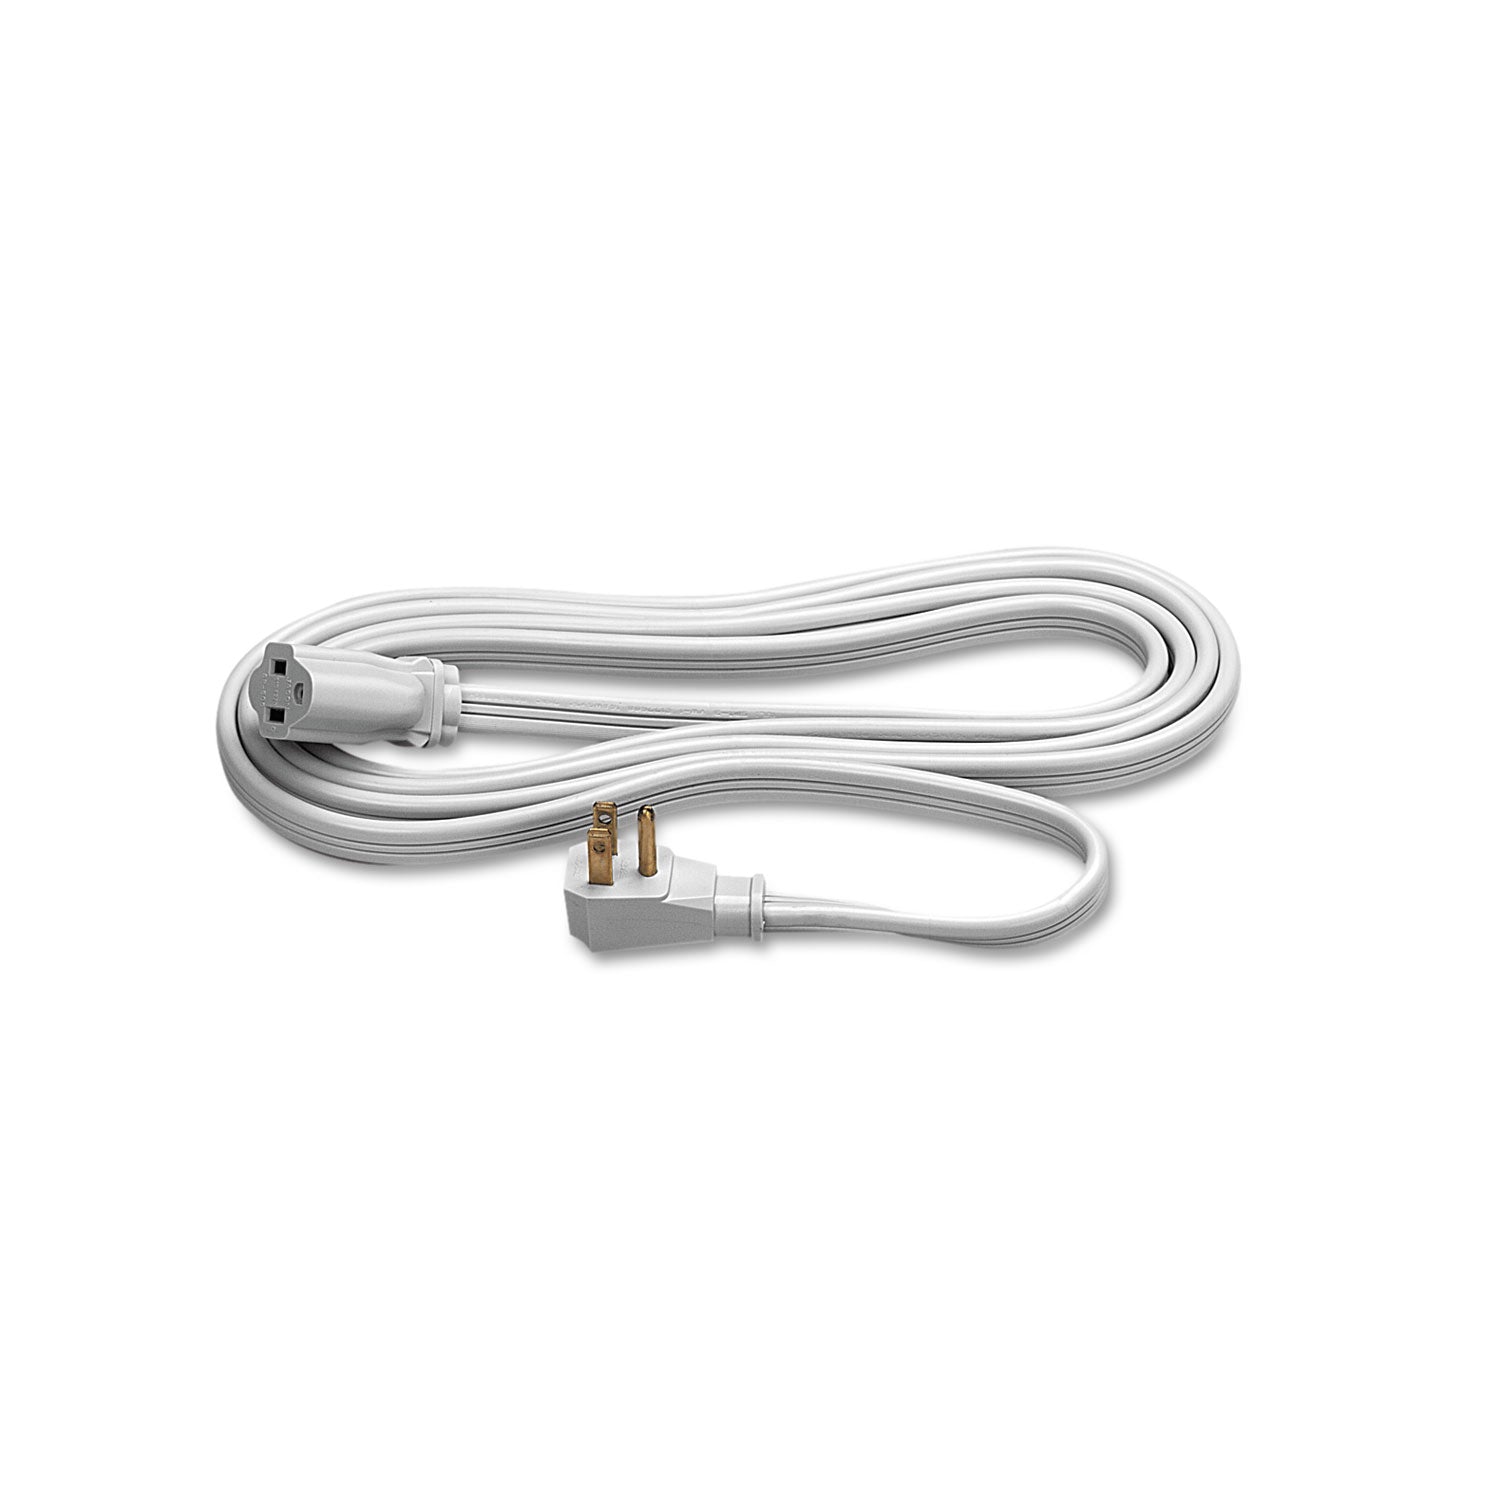 Indoor Heavy-Duty Extension Cord, 9 ft, 15 A, Gray - 